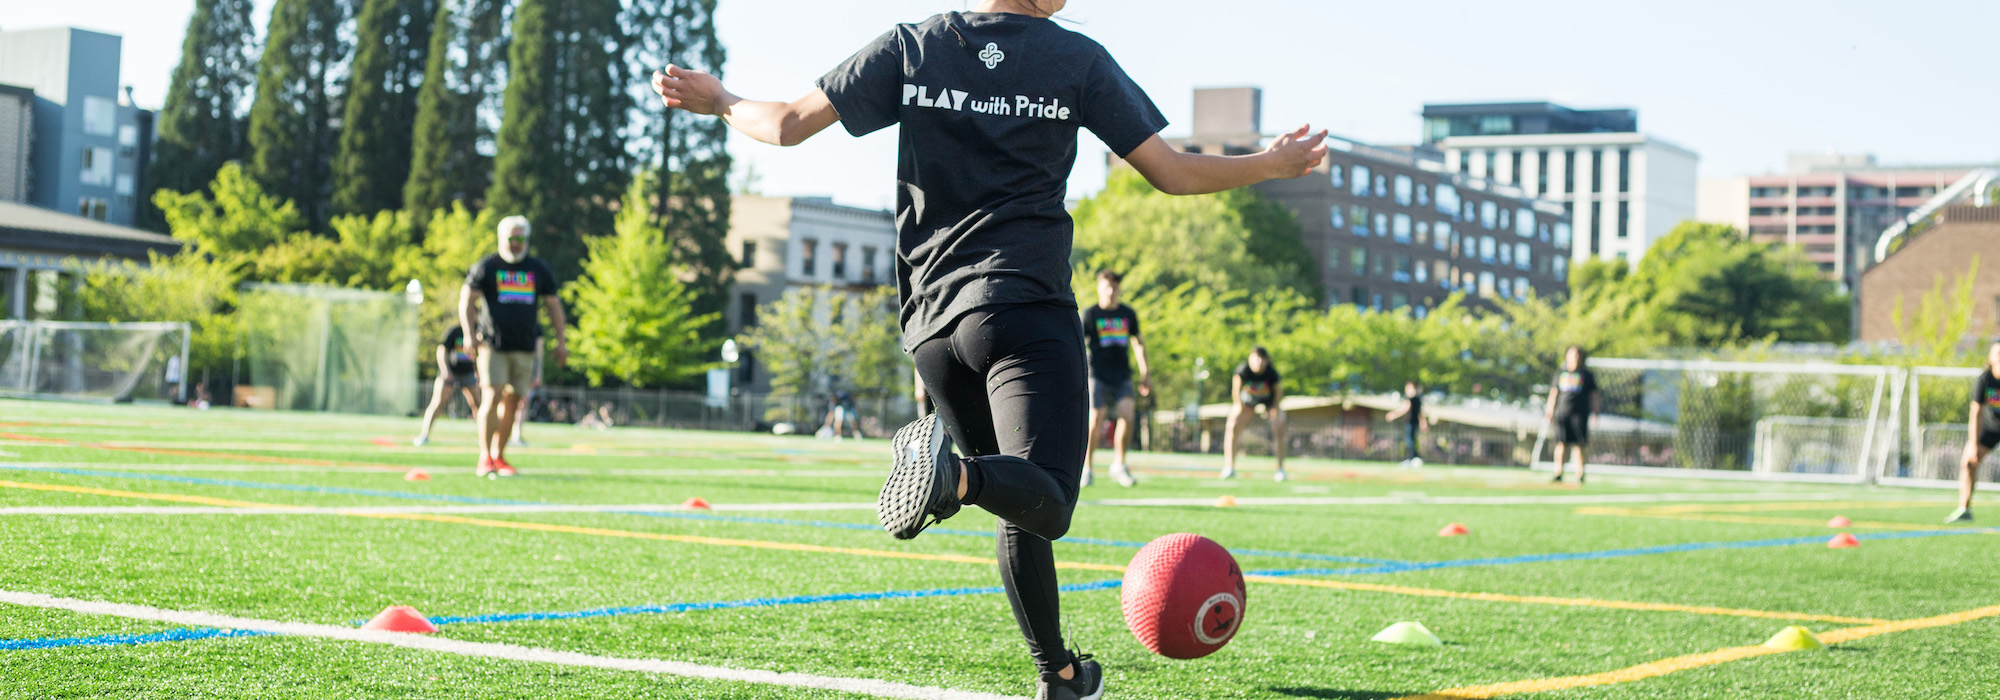 Person with a "Play with Pride" shirt is kicking a ball to teammates during the Pride Kickball Tournament in 2019 at Stott Field.